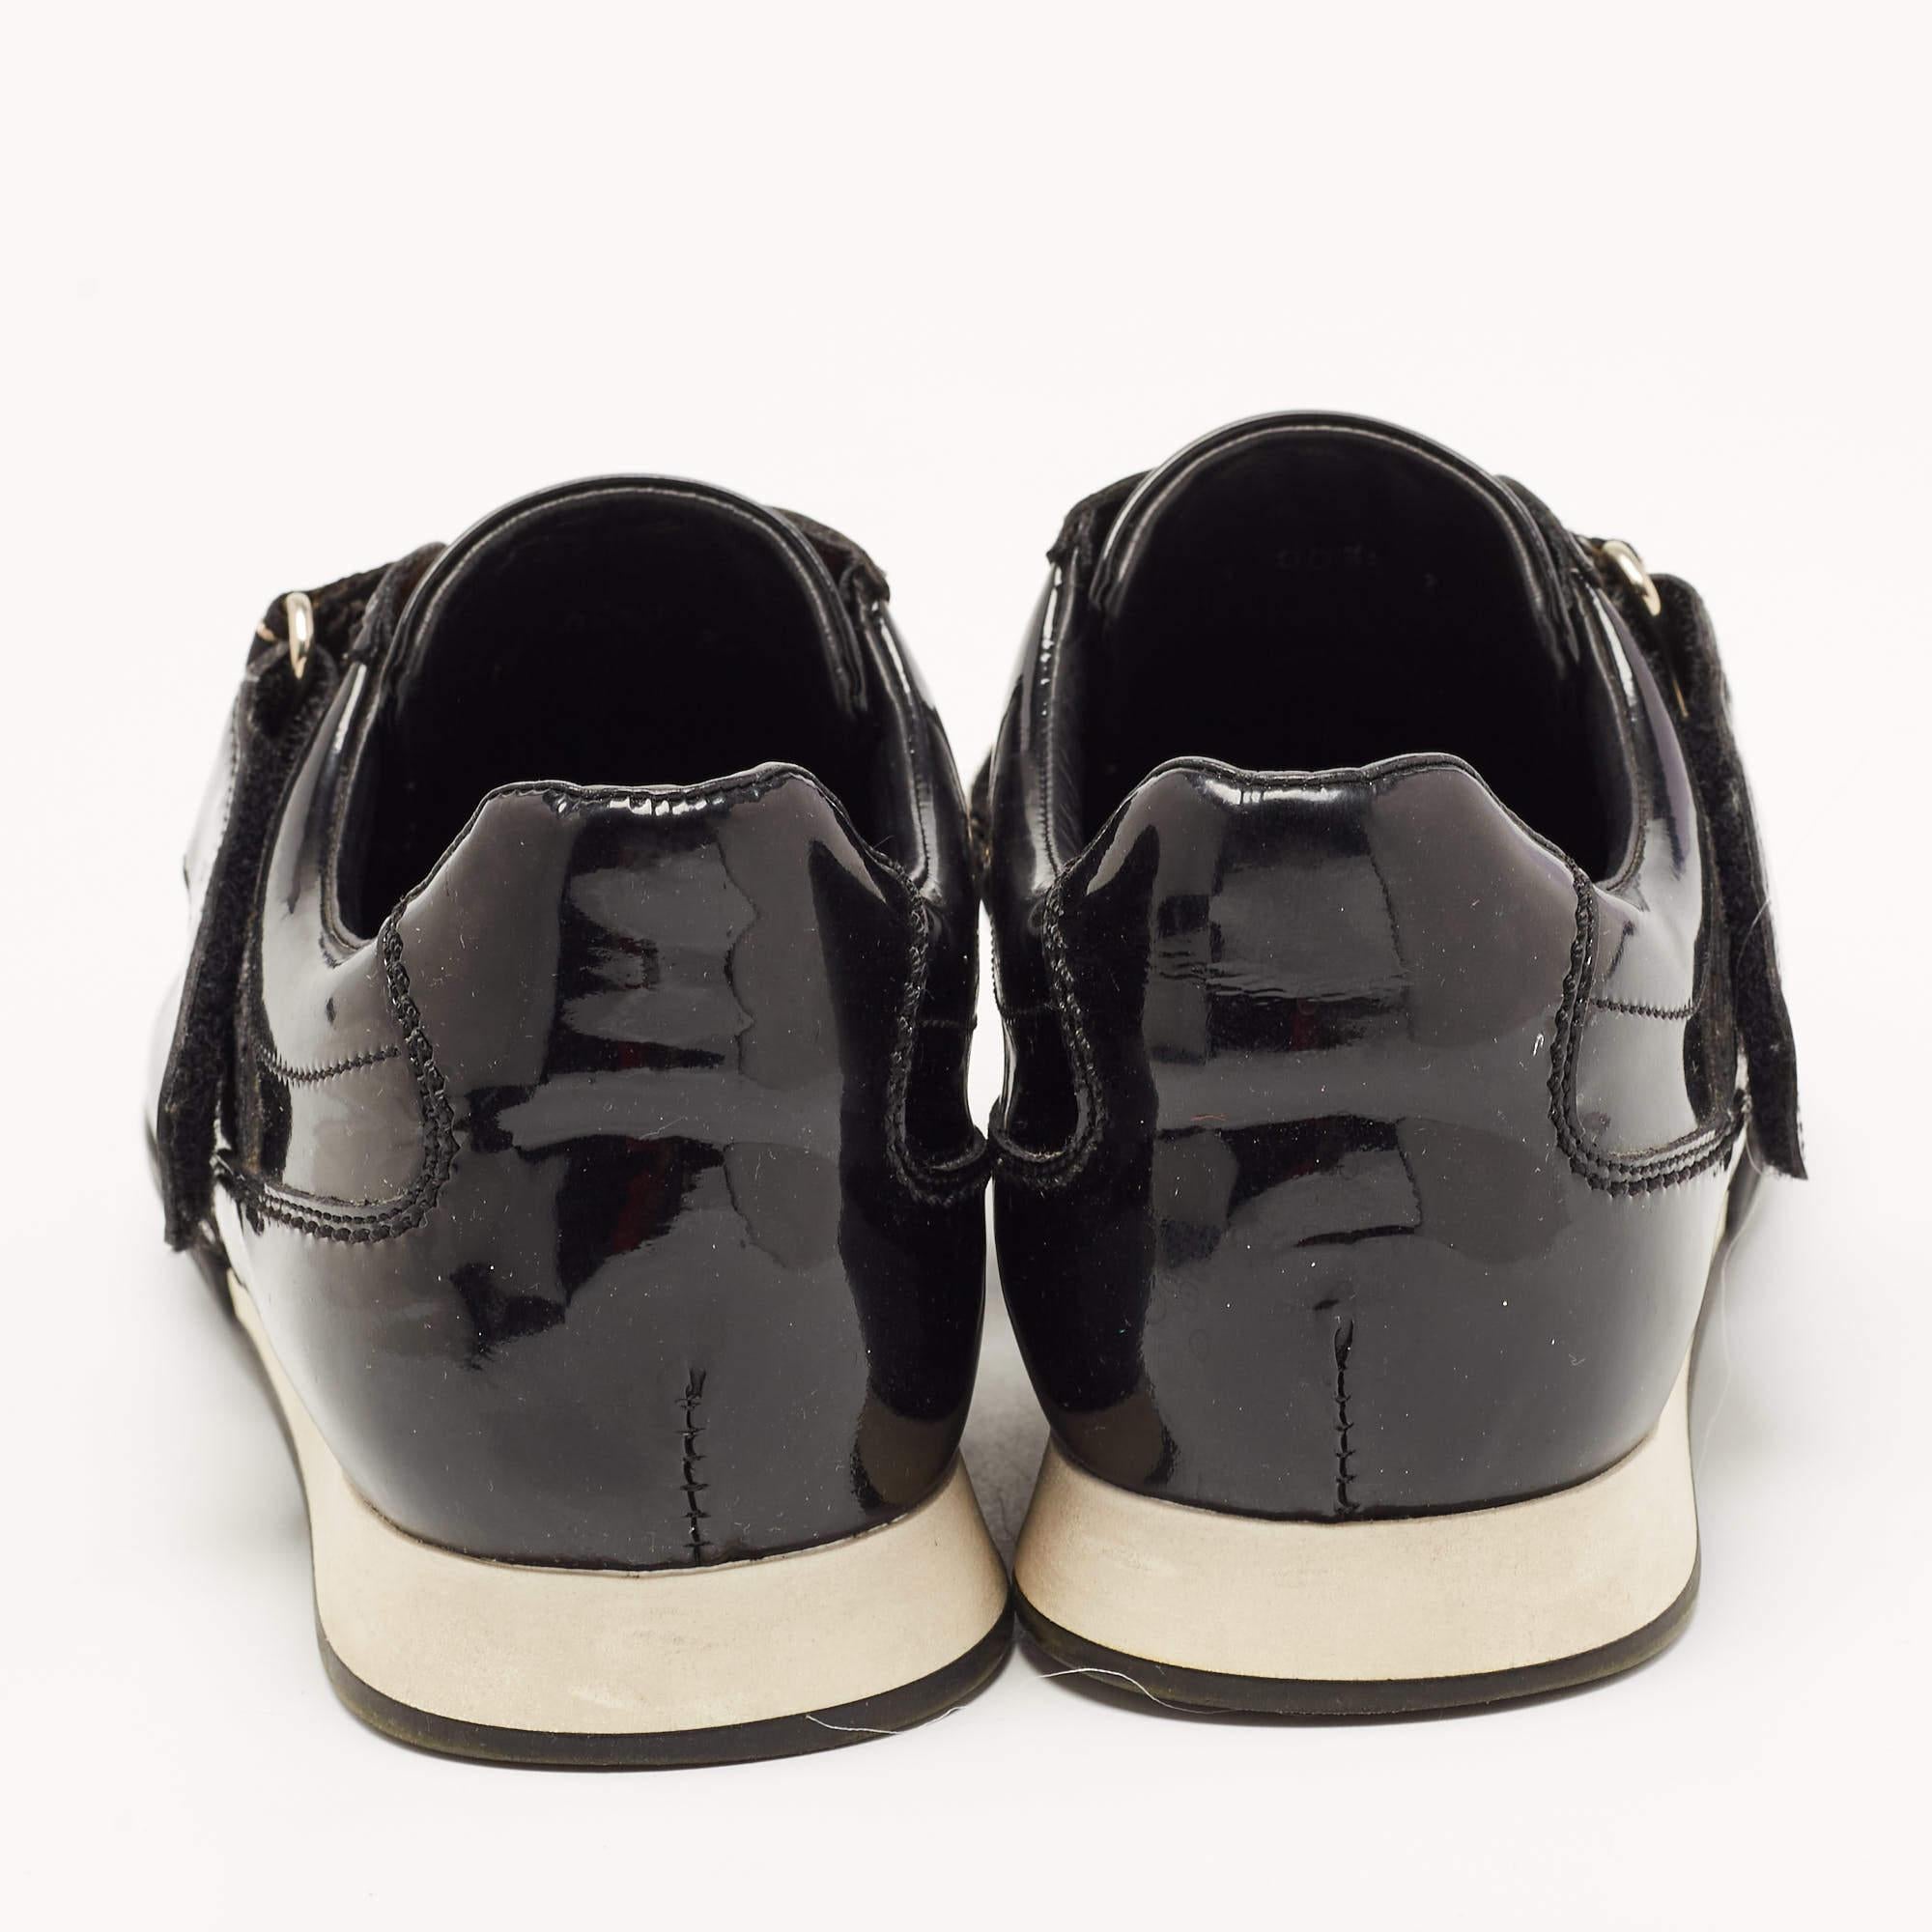 Louis Vuitton Black Patent Leather Sneakers Size 36 For Sale 2